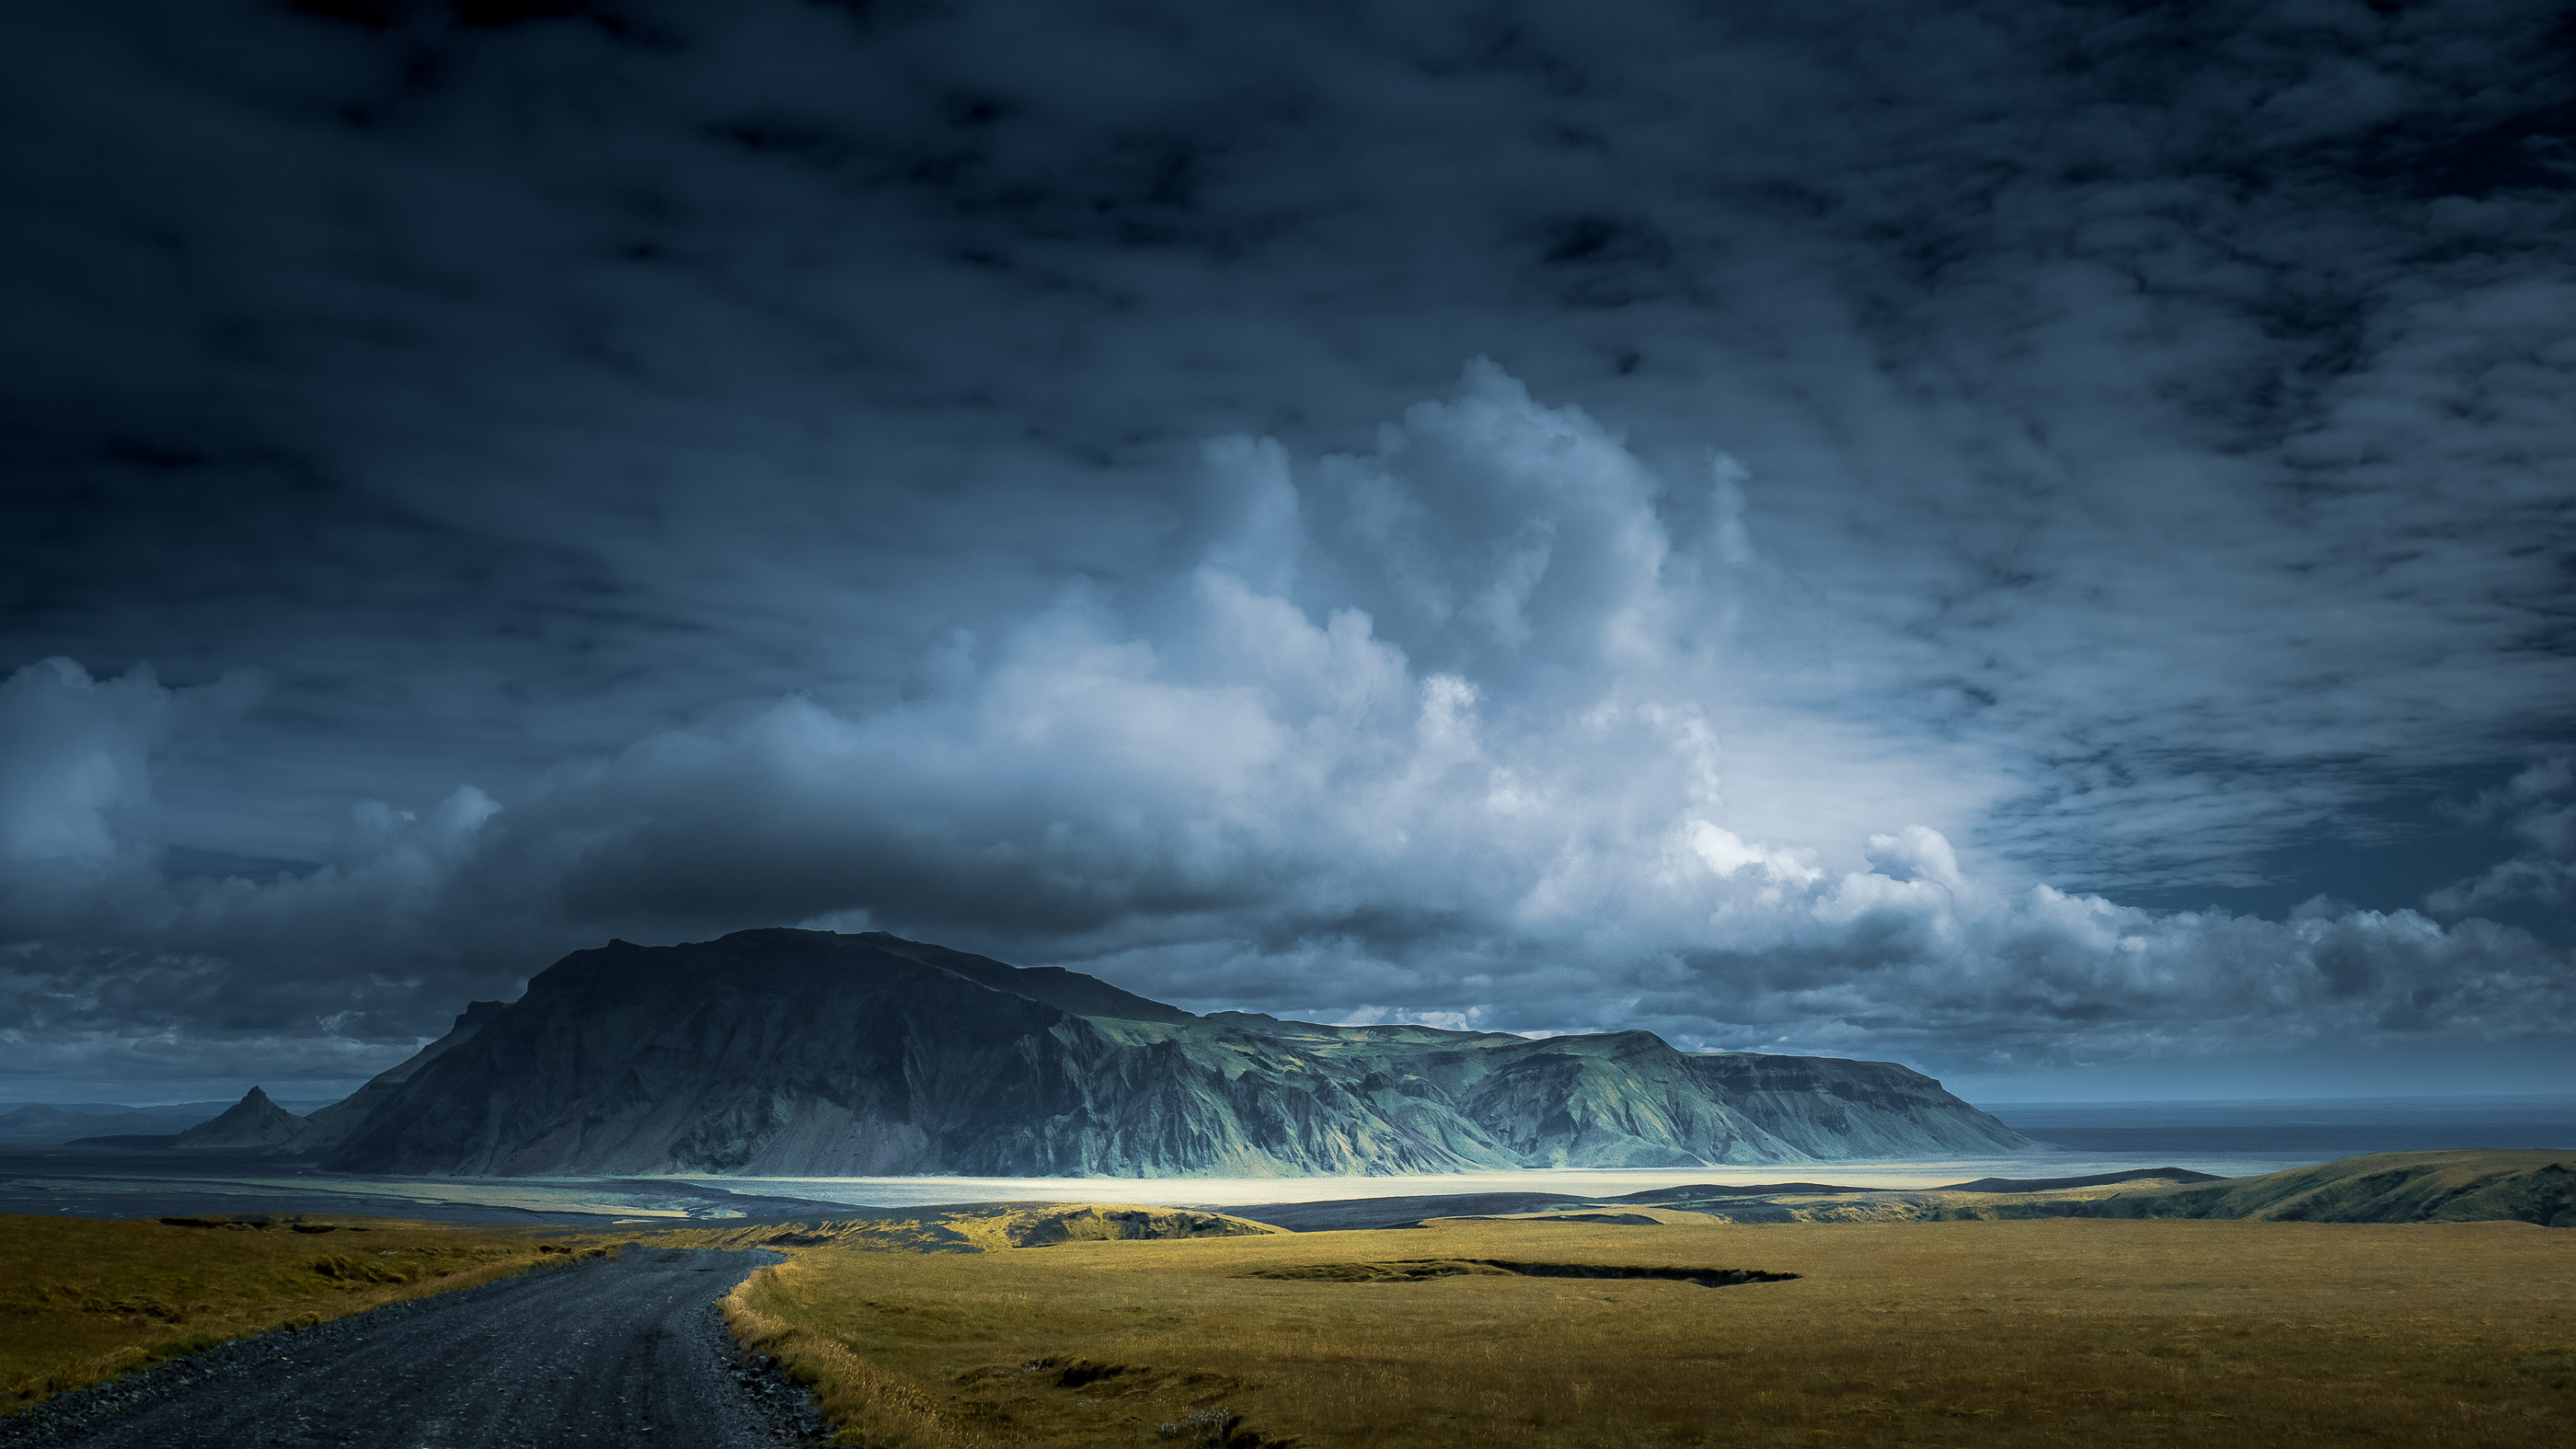 General 2800x1575 photography landscape nature mountains clouds road sky Iceland beach field Behance